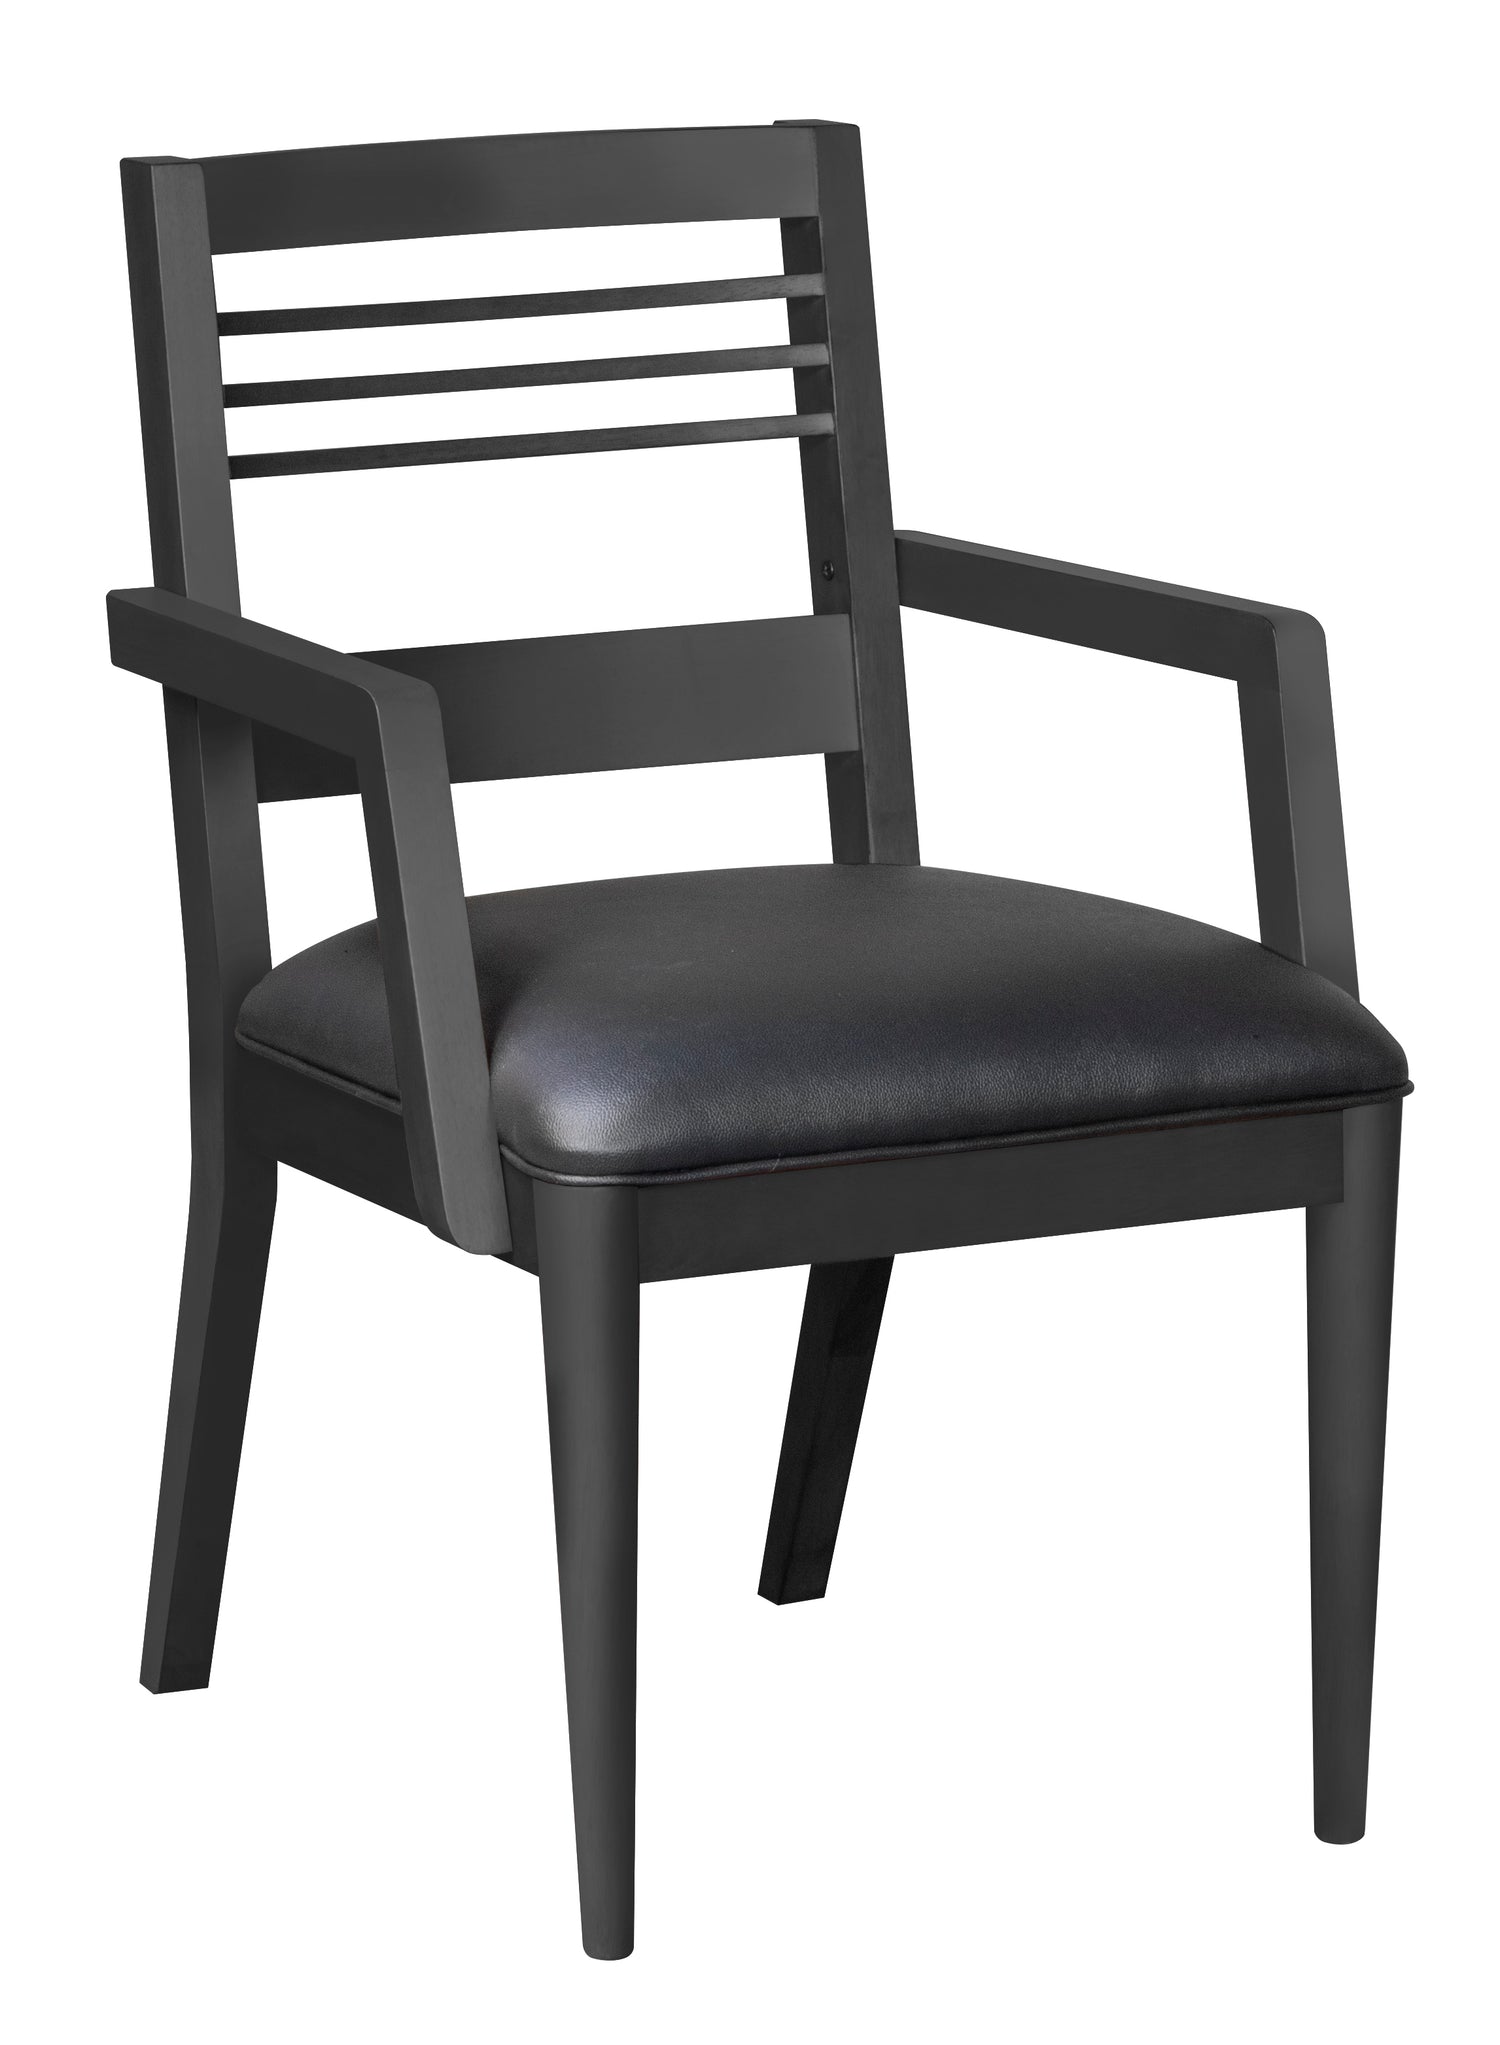 Legacy Billiards Collins Game Chair in Graphite Finish